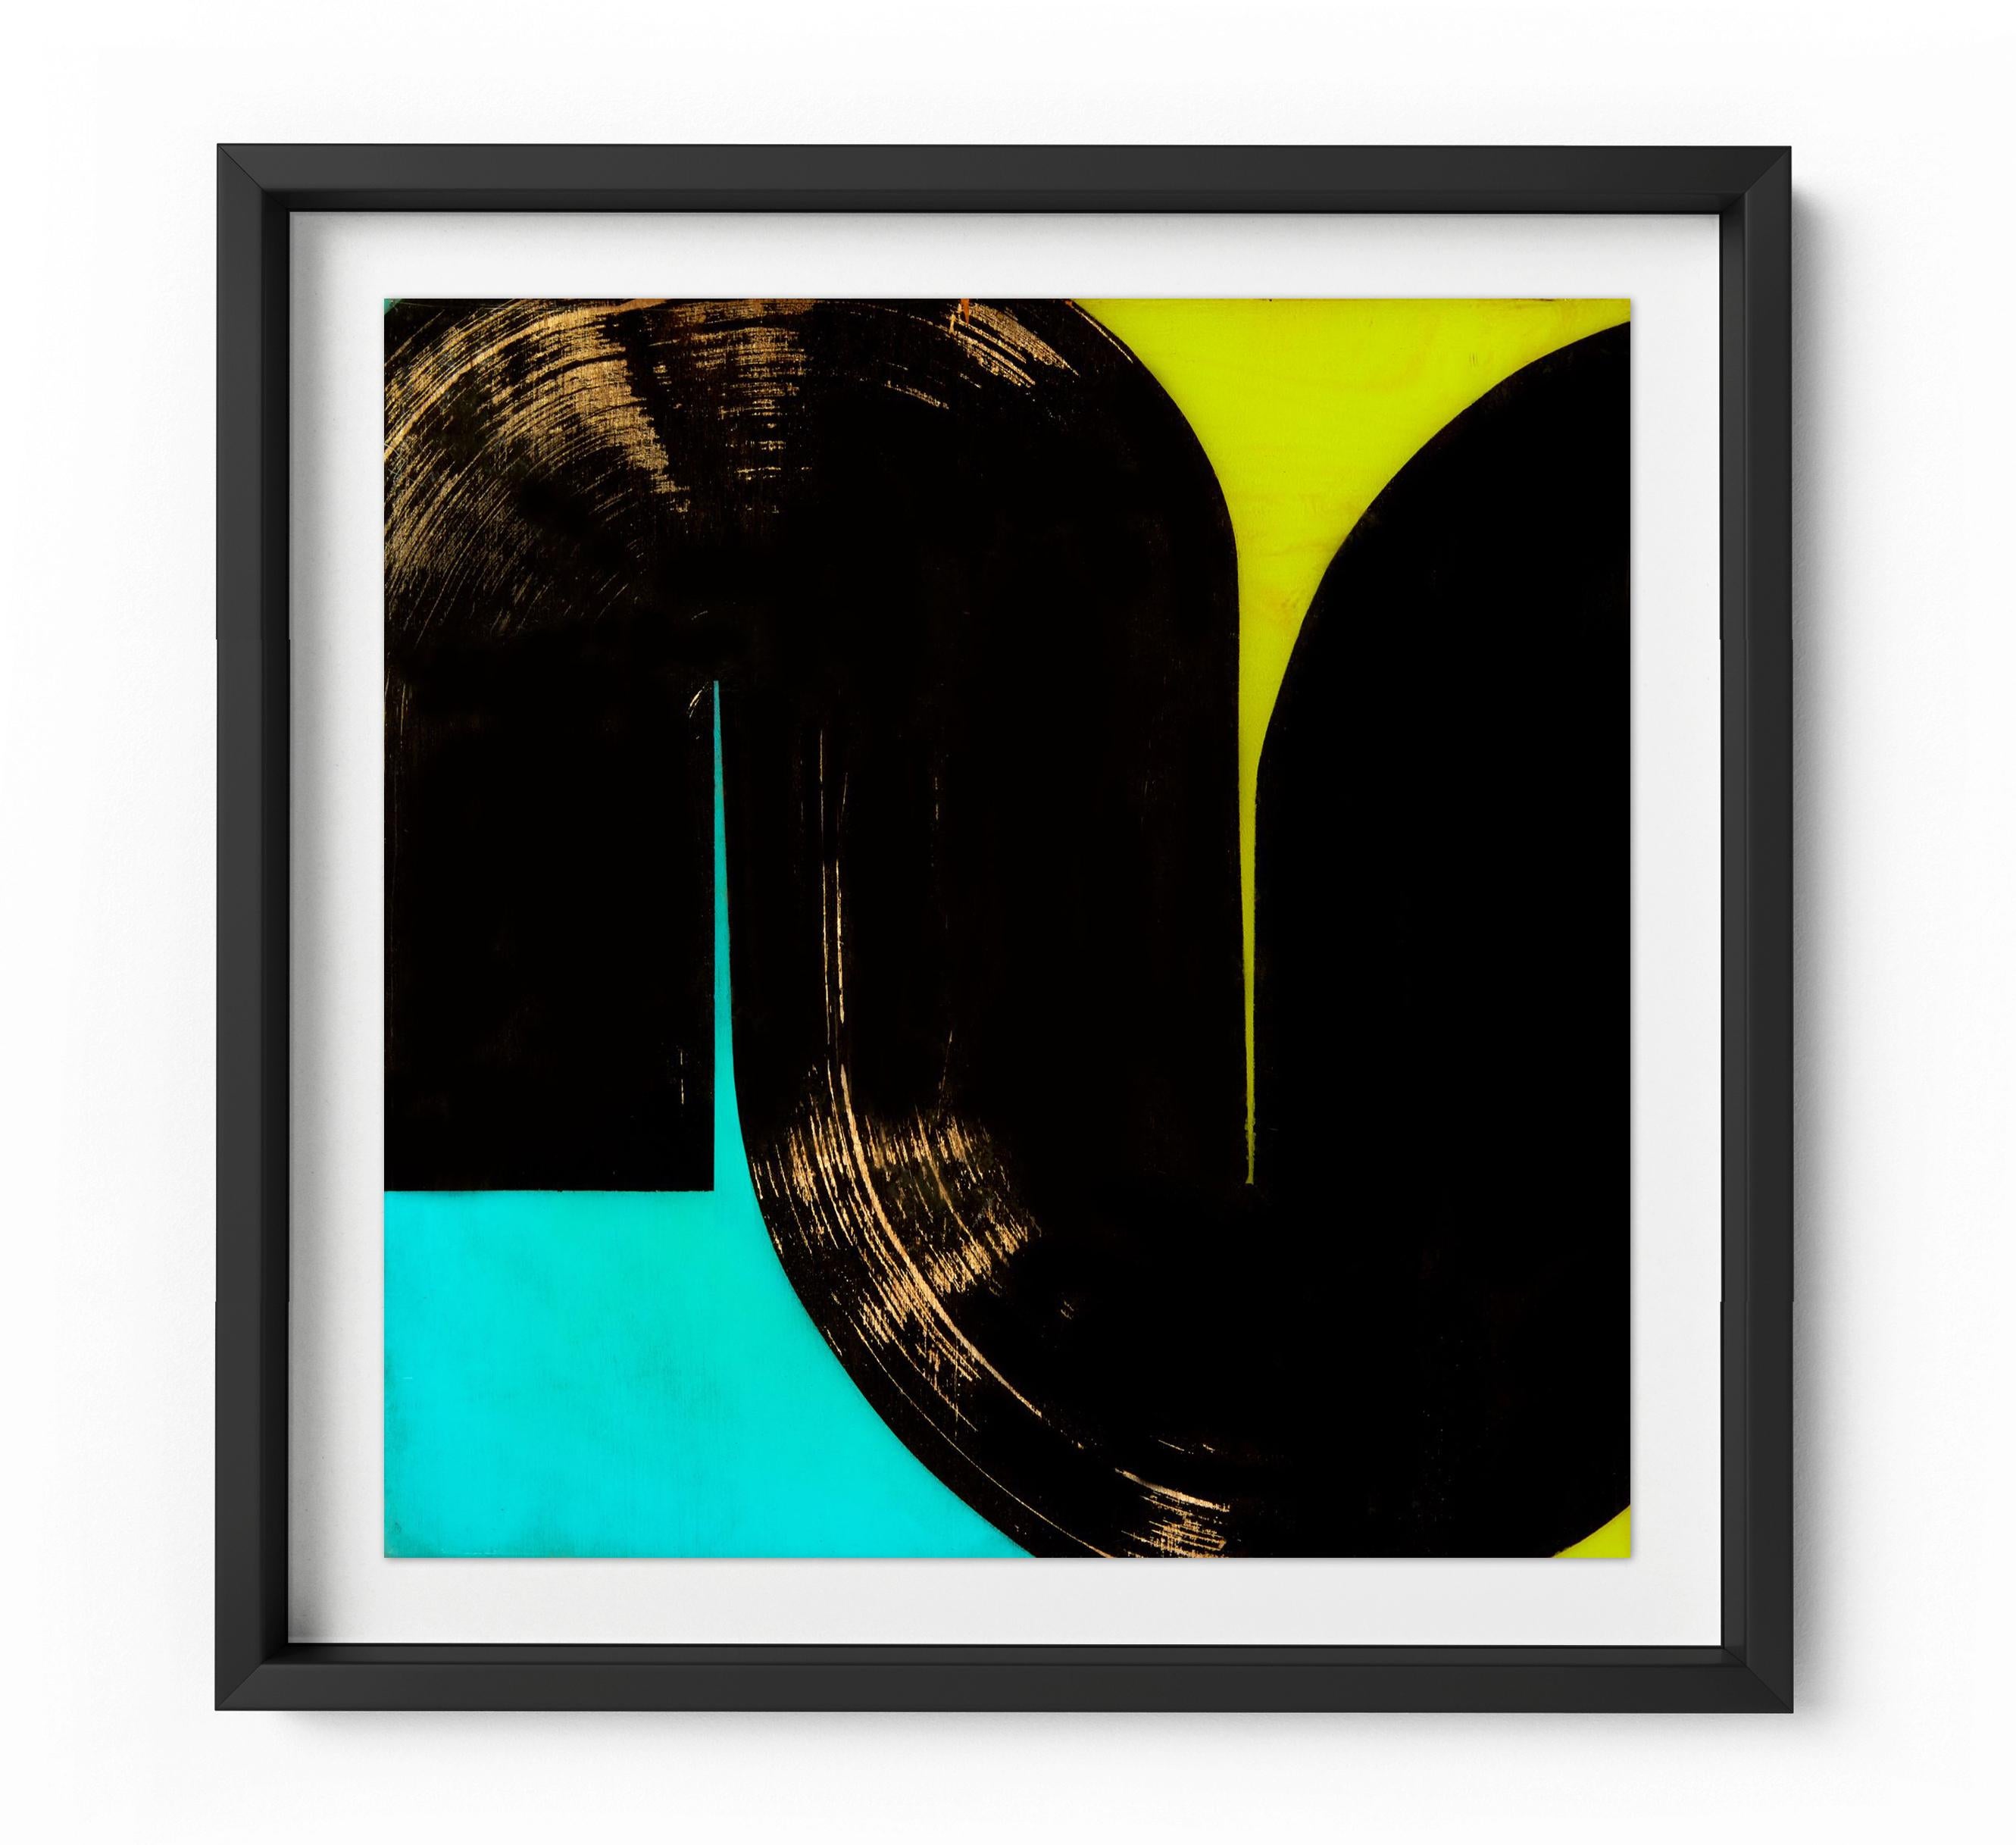 U-turn - Framed Limited Edition Print - Contemporary - Modern Abstract